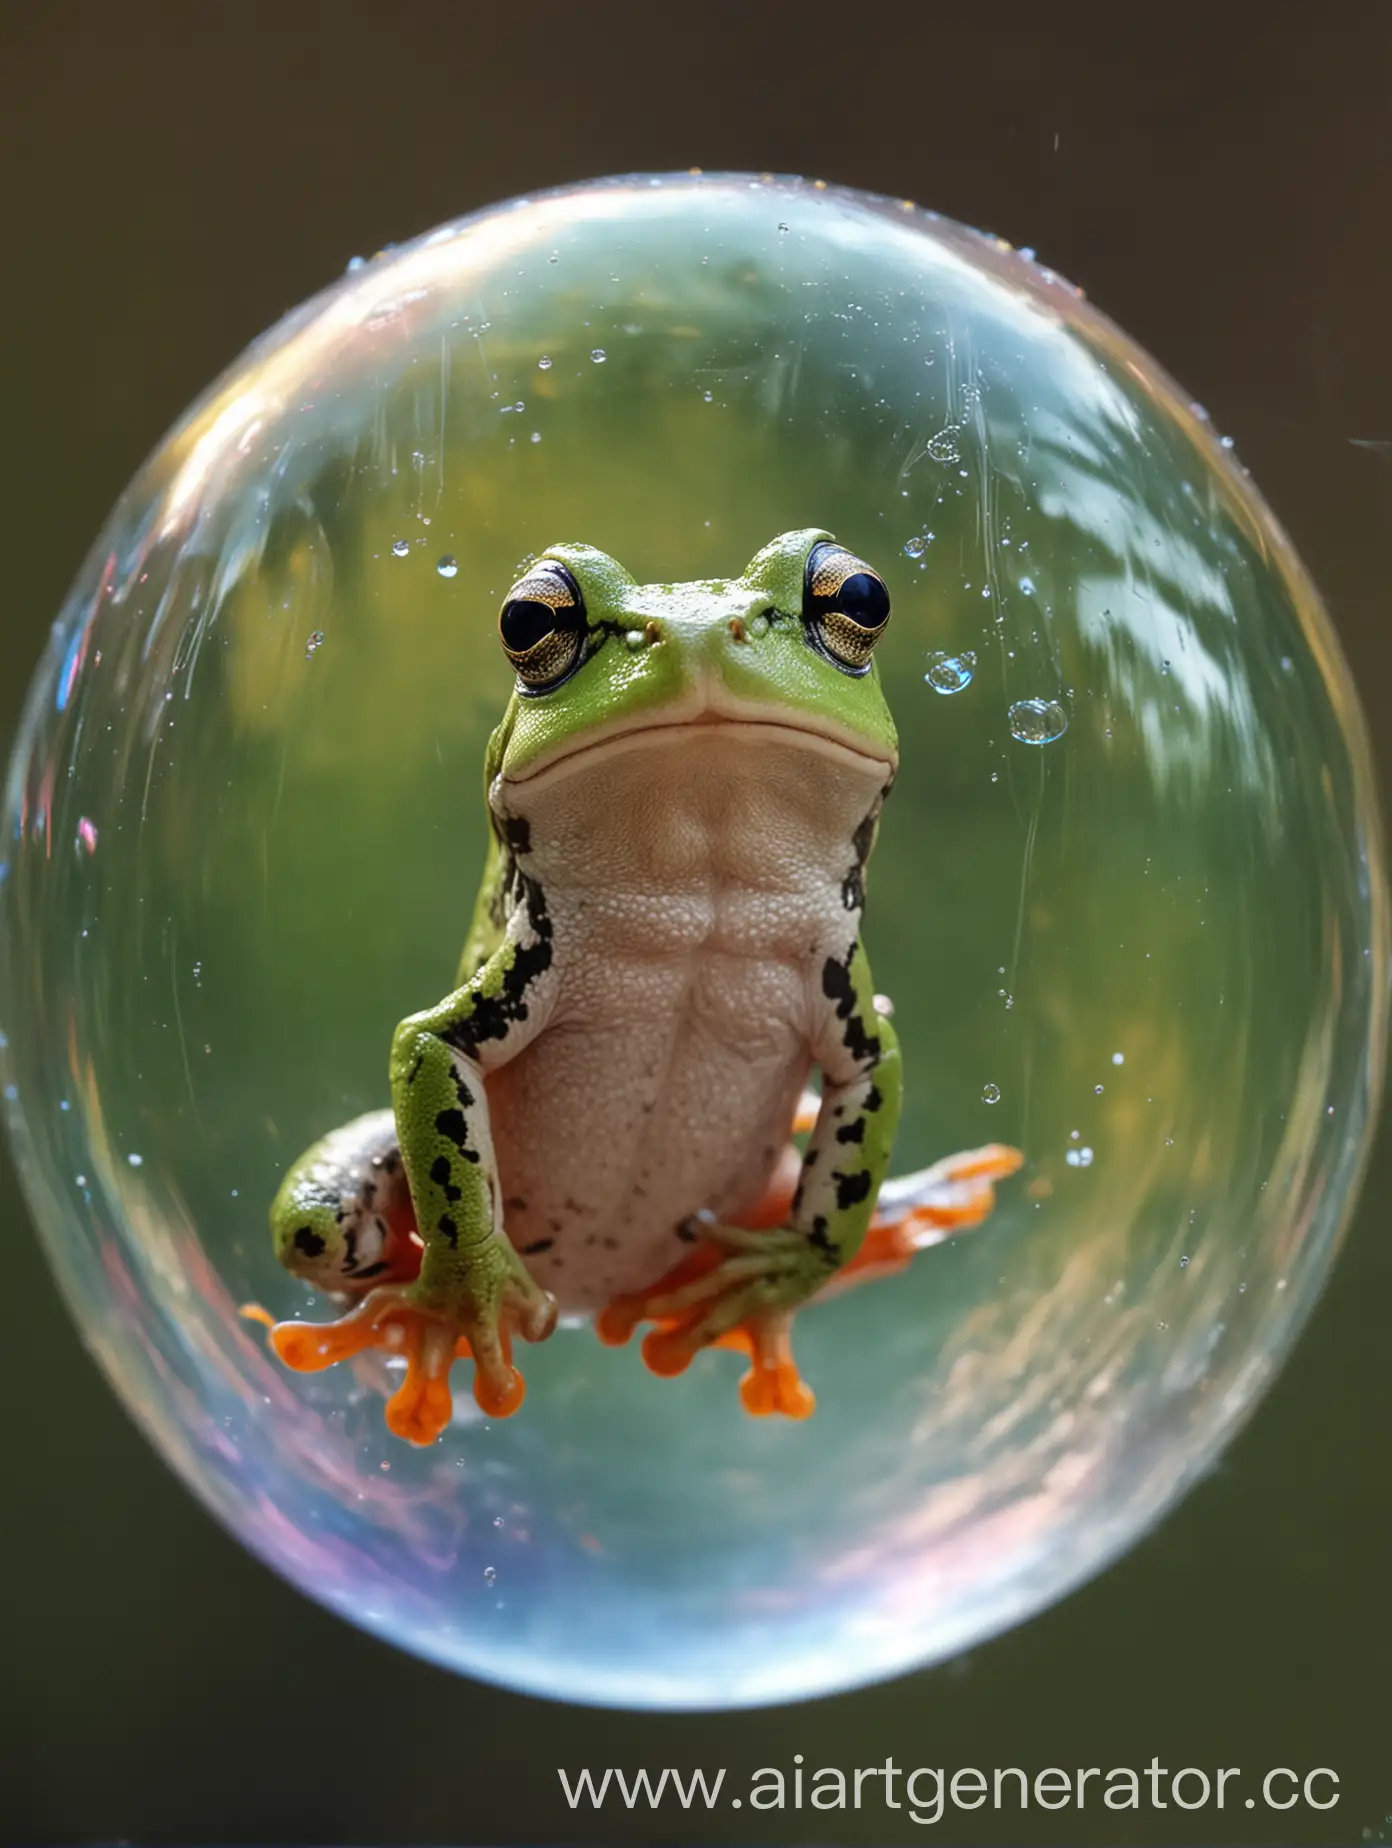 Playful-Frog-Captured-Inside-a-Magical-Soap-Bubble